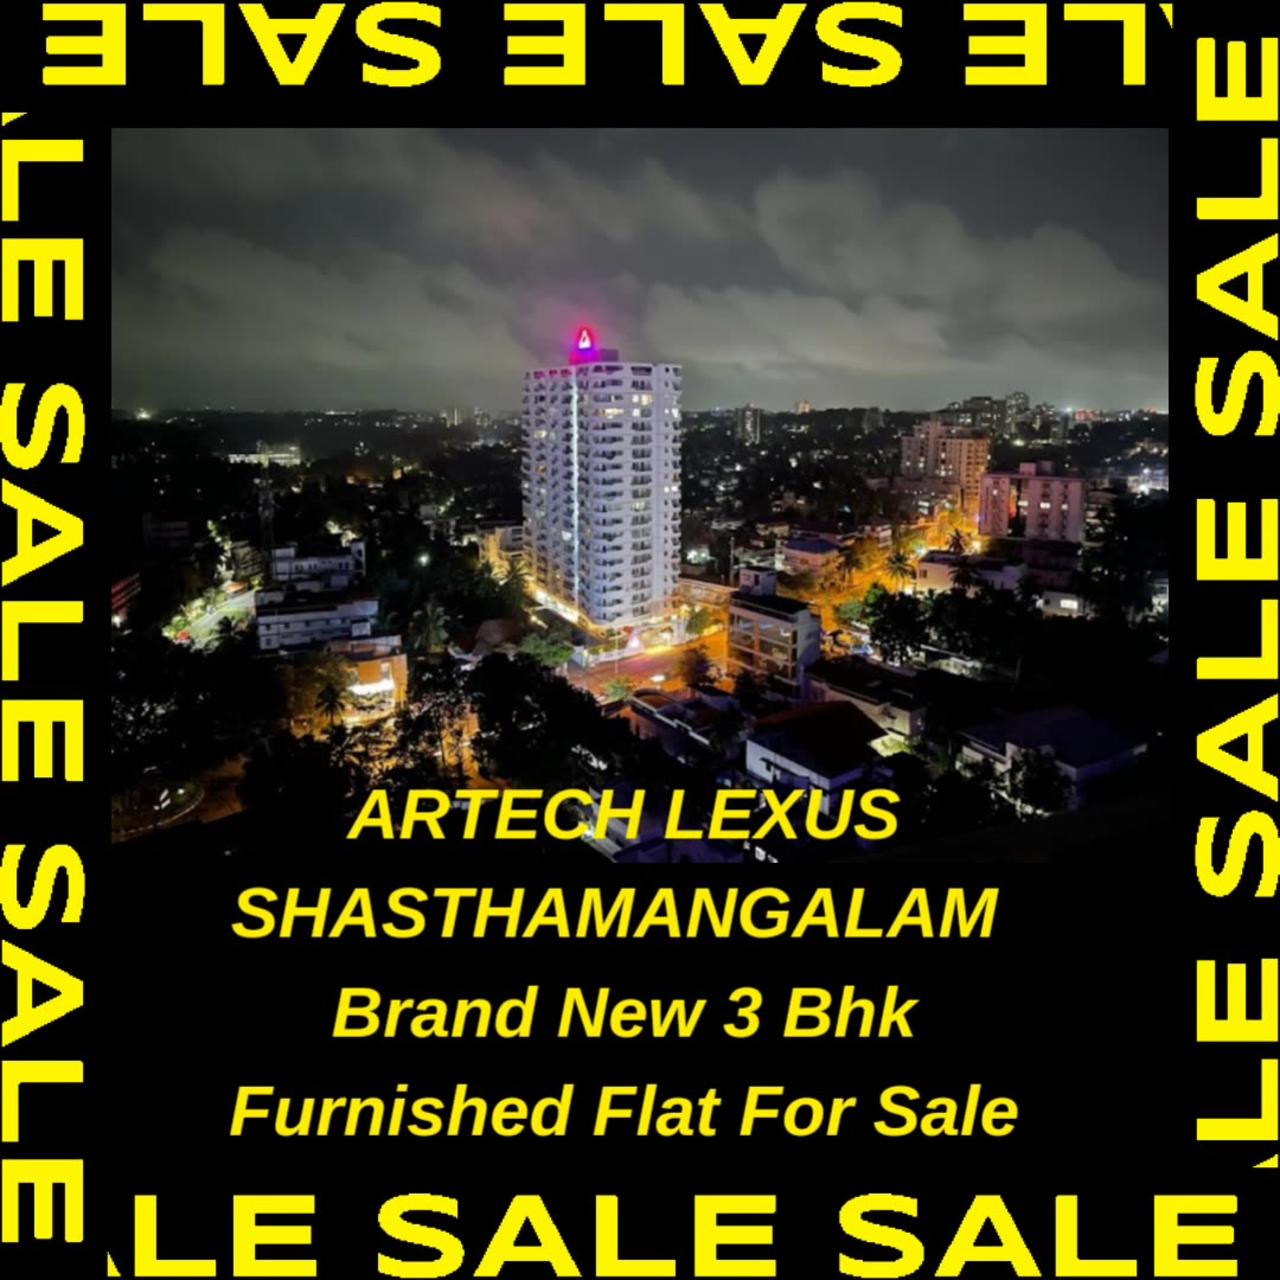 3 Bhk Flat For Sale in Trivandrum